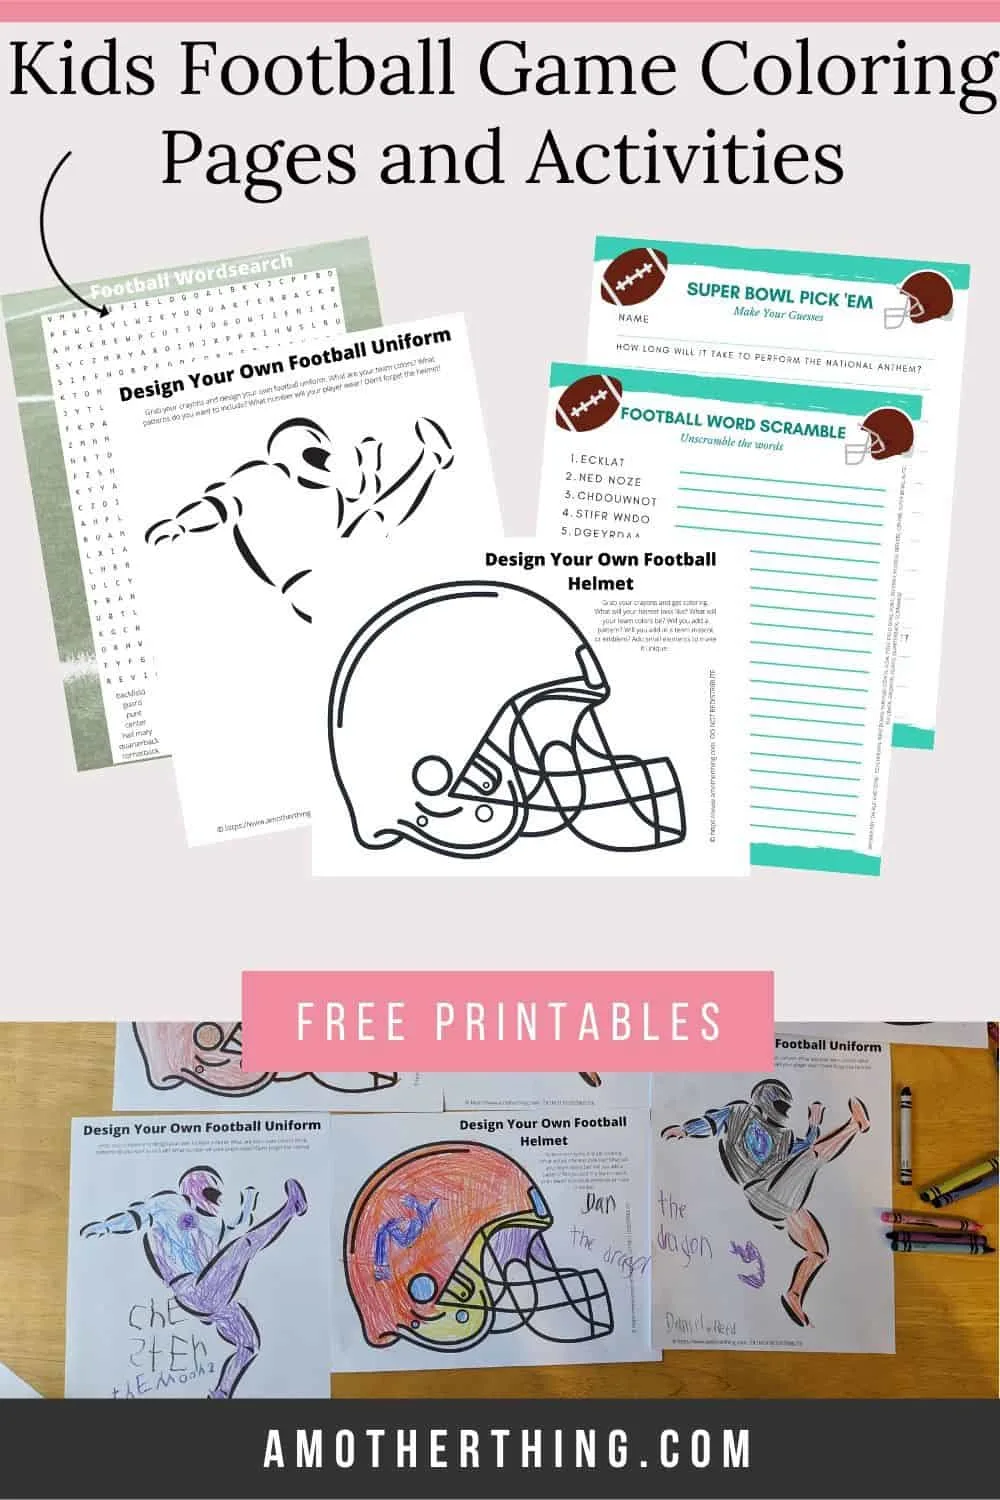 Free kids football coloring pages and activity sheets